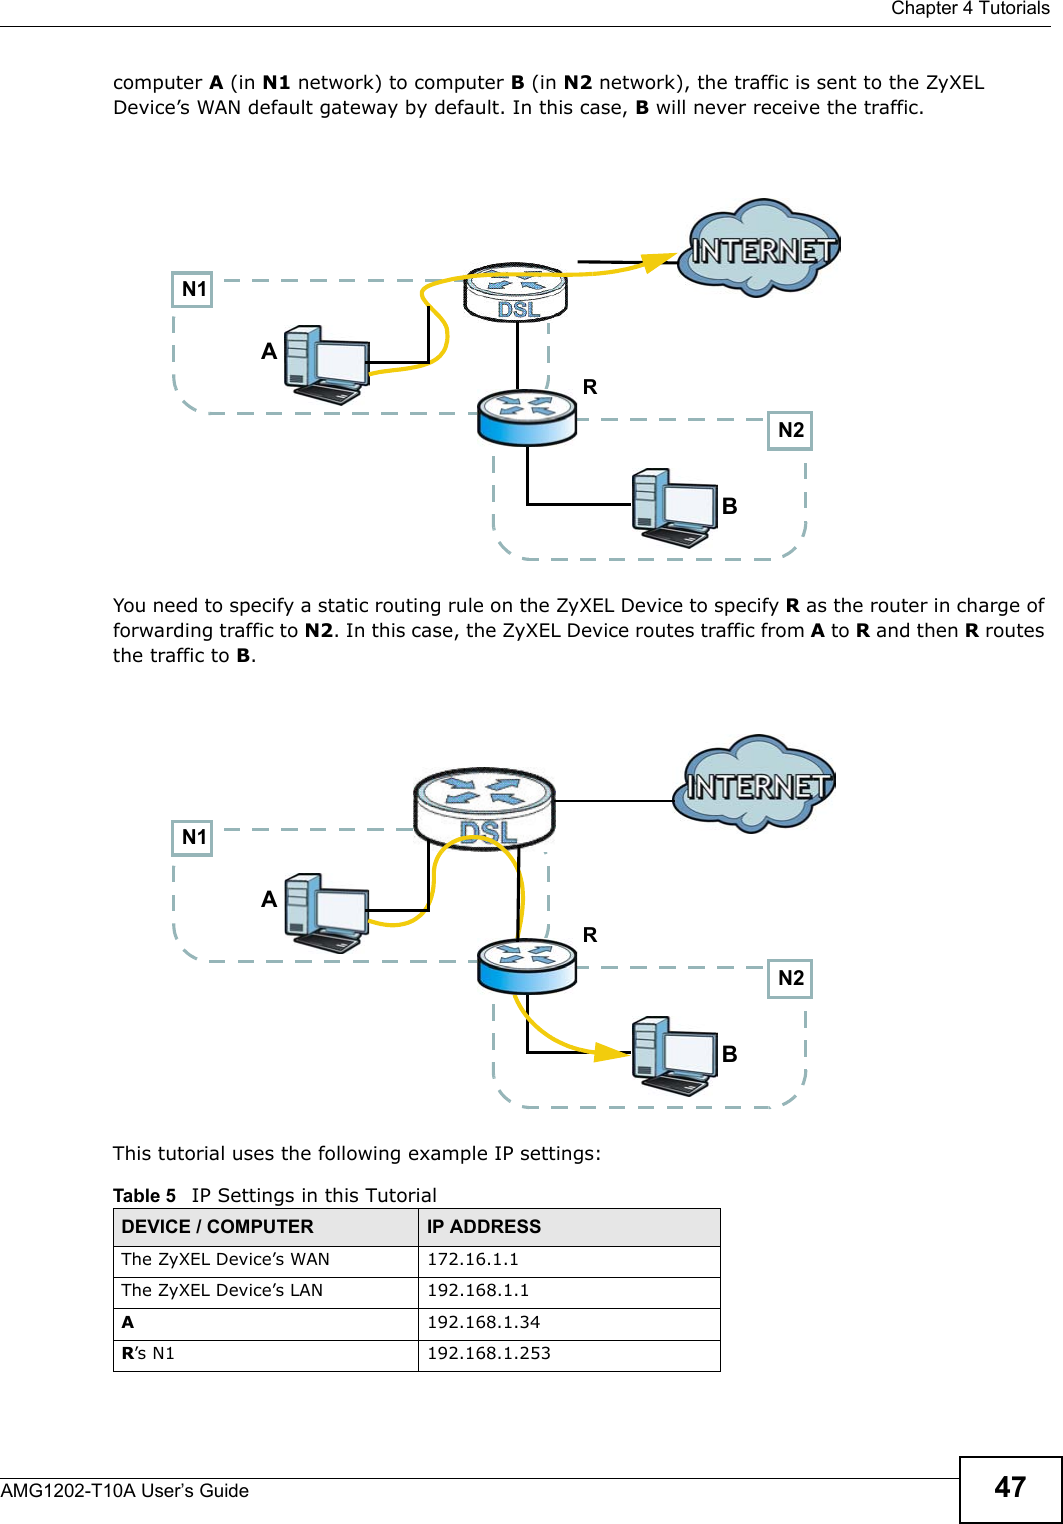  Chapter 4 TutorialsAMG1202-T10A User’s Guide 47computer A (in N1 network) to computer B (in N2 network), the traffic is sent to the ZyXEL Device’s WAN default gateway by default. In this case, B will never receive the traffic.You need to specify a static routing rule on the ZyXEL Device to specify R as the router in charge of forwarding traffic to N2. In this case, the ZyXEL Device routes traffic from A to R and then R routes the traffic to B.This tutorial uses the following example IP settings:Table 5   IP Settings in this TutorialDEVICE / COMPUTER IP ADDRESSThe ZyXEL Device’s WAN 172.16.1.1The ZyXEL Device’s LAN 192.168.1.1A192.168.1.34R’s N1  192.168.1.253N2BN1ARN2BN1AR